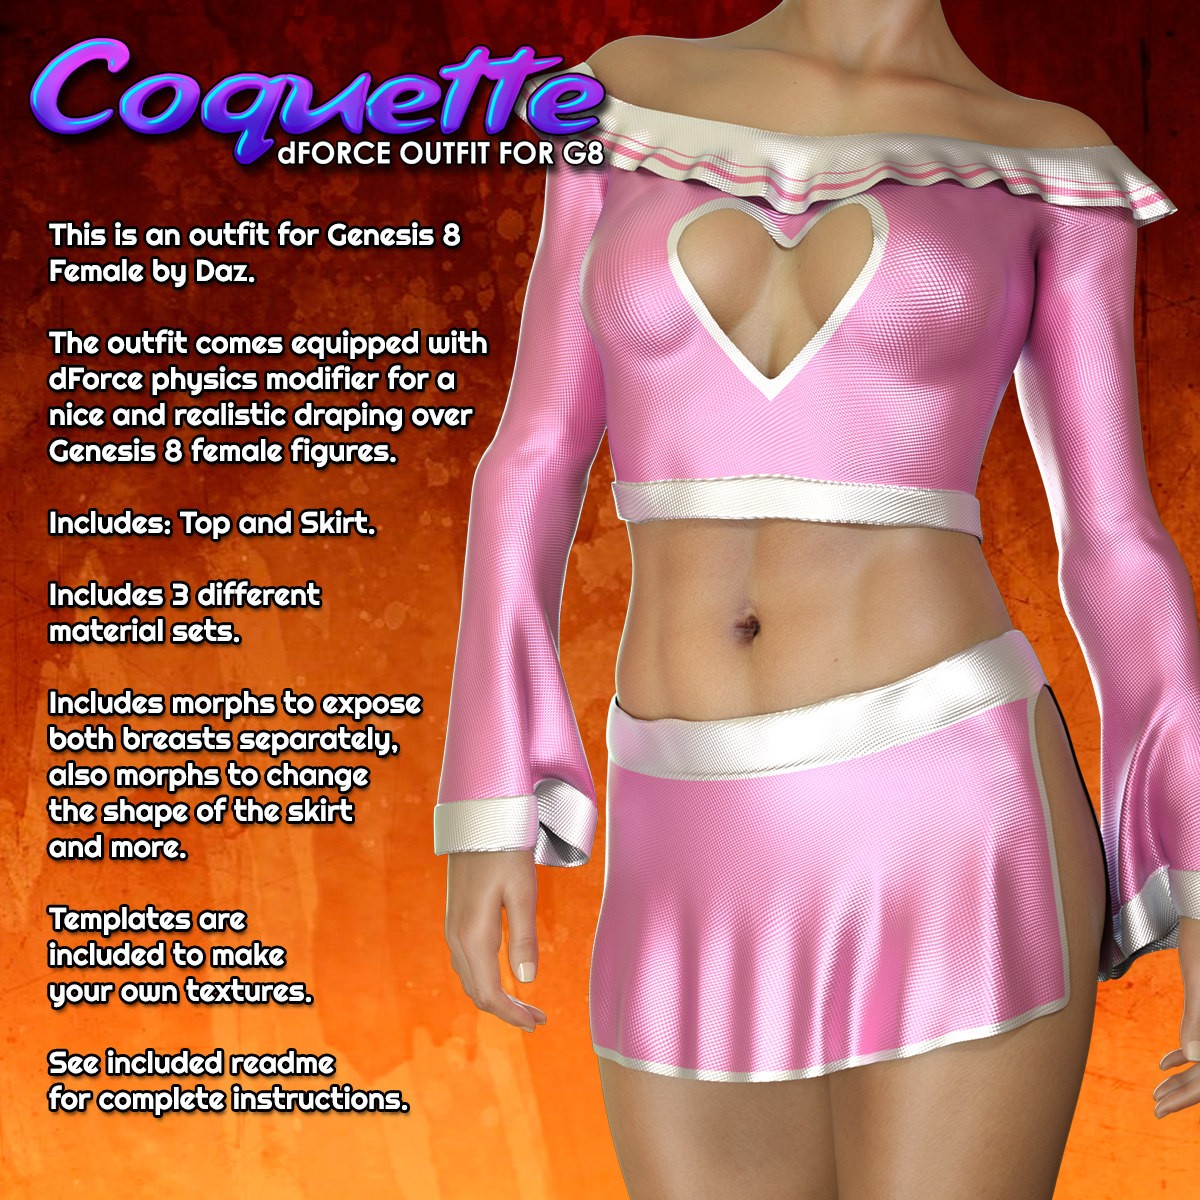 Exnem dForce Coquette Outfit for G8F [Dead Post Repost]